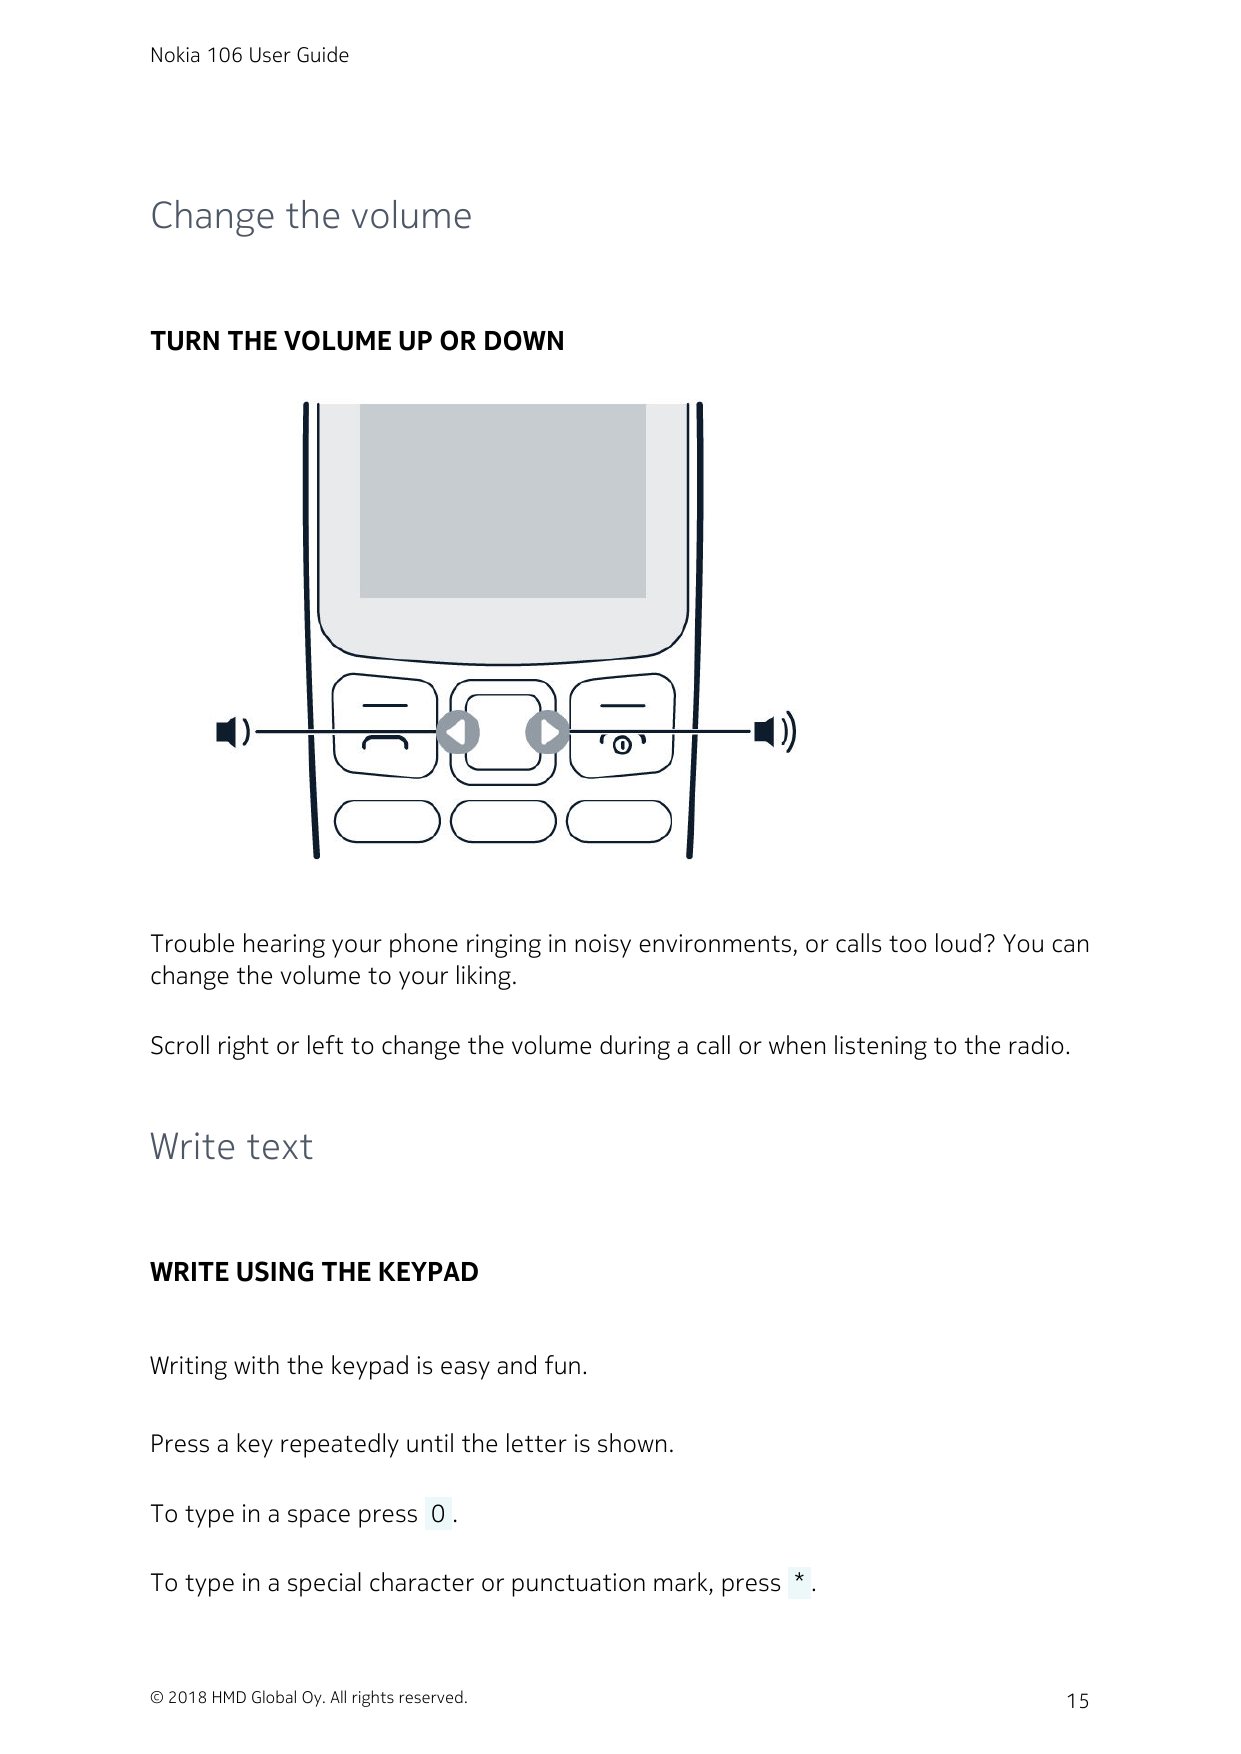 Nokia 106 User GuideChange the volumeTURN THE VOLUME UP OR DOWNTrouble hearing your phone ringing in noisy environments, or call